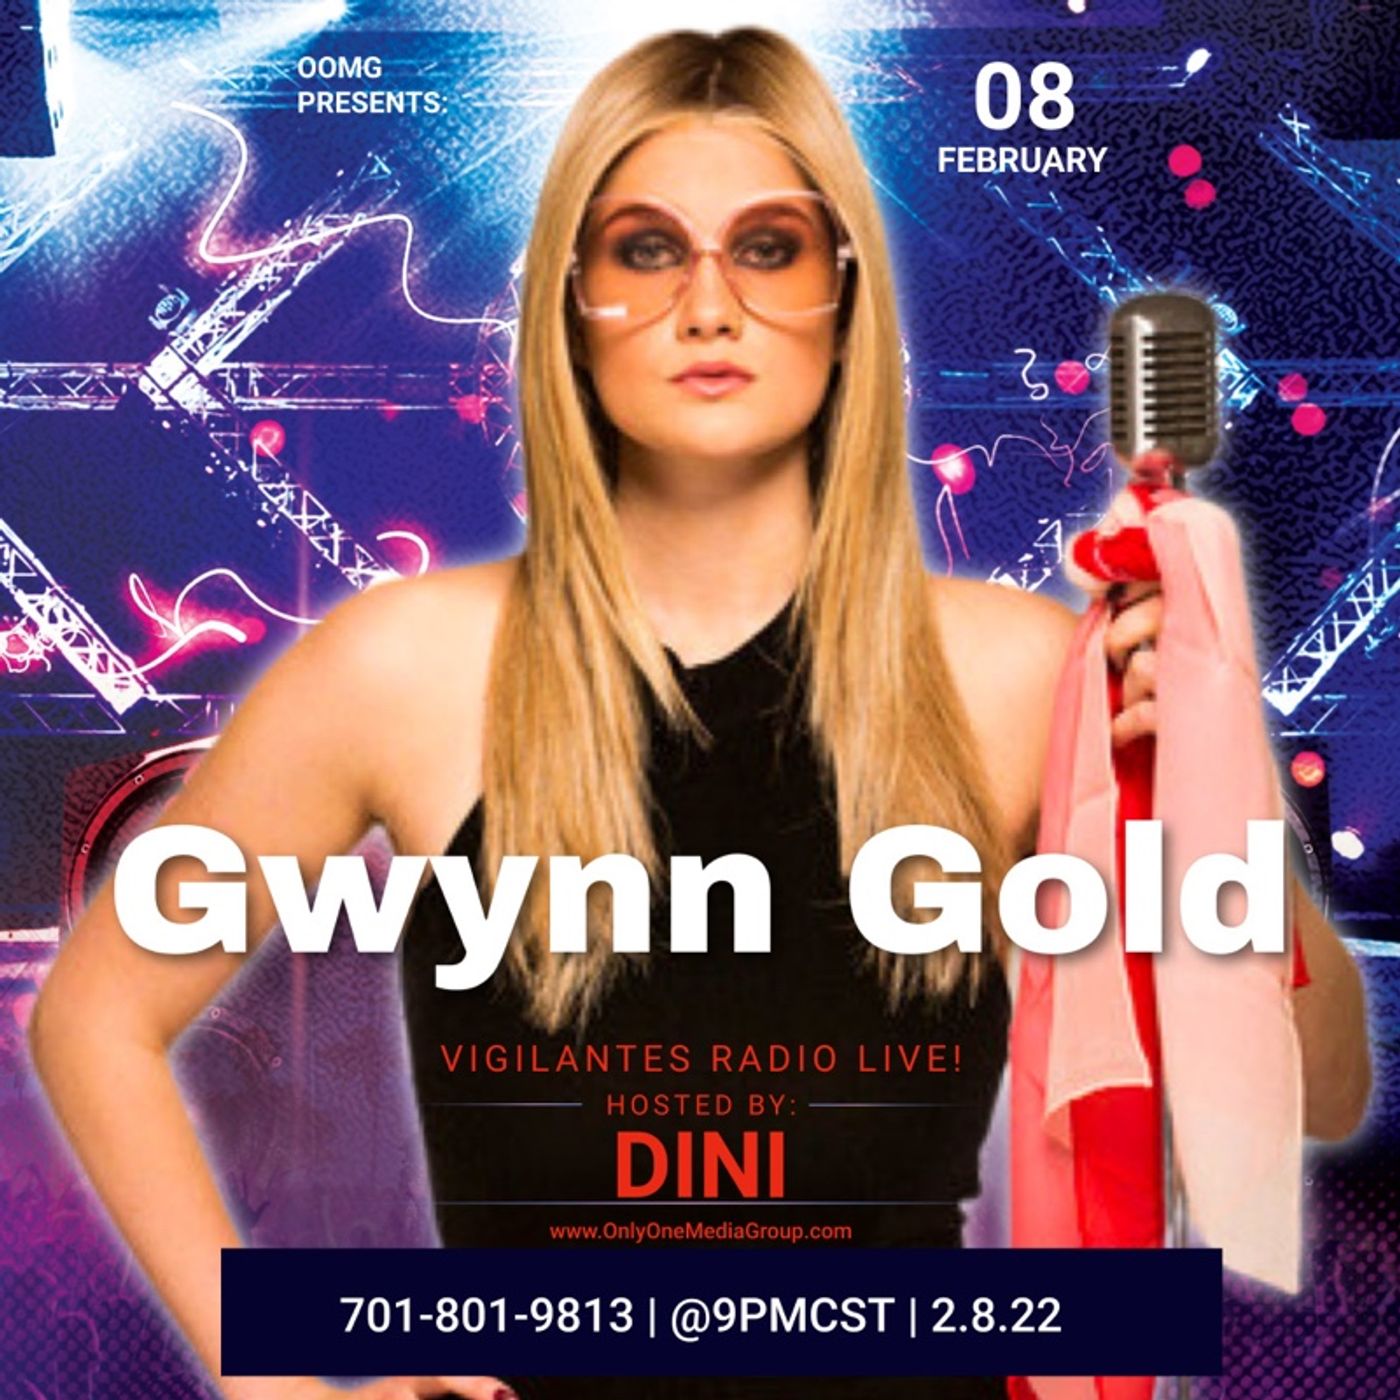 The Gwynn Gold Interview. Image